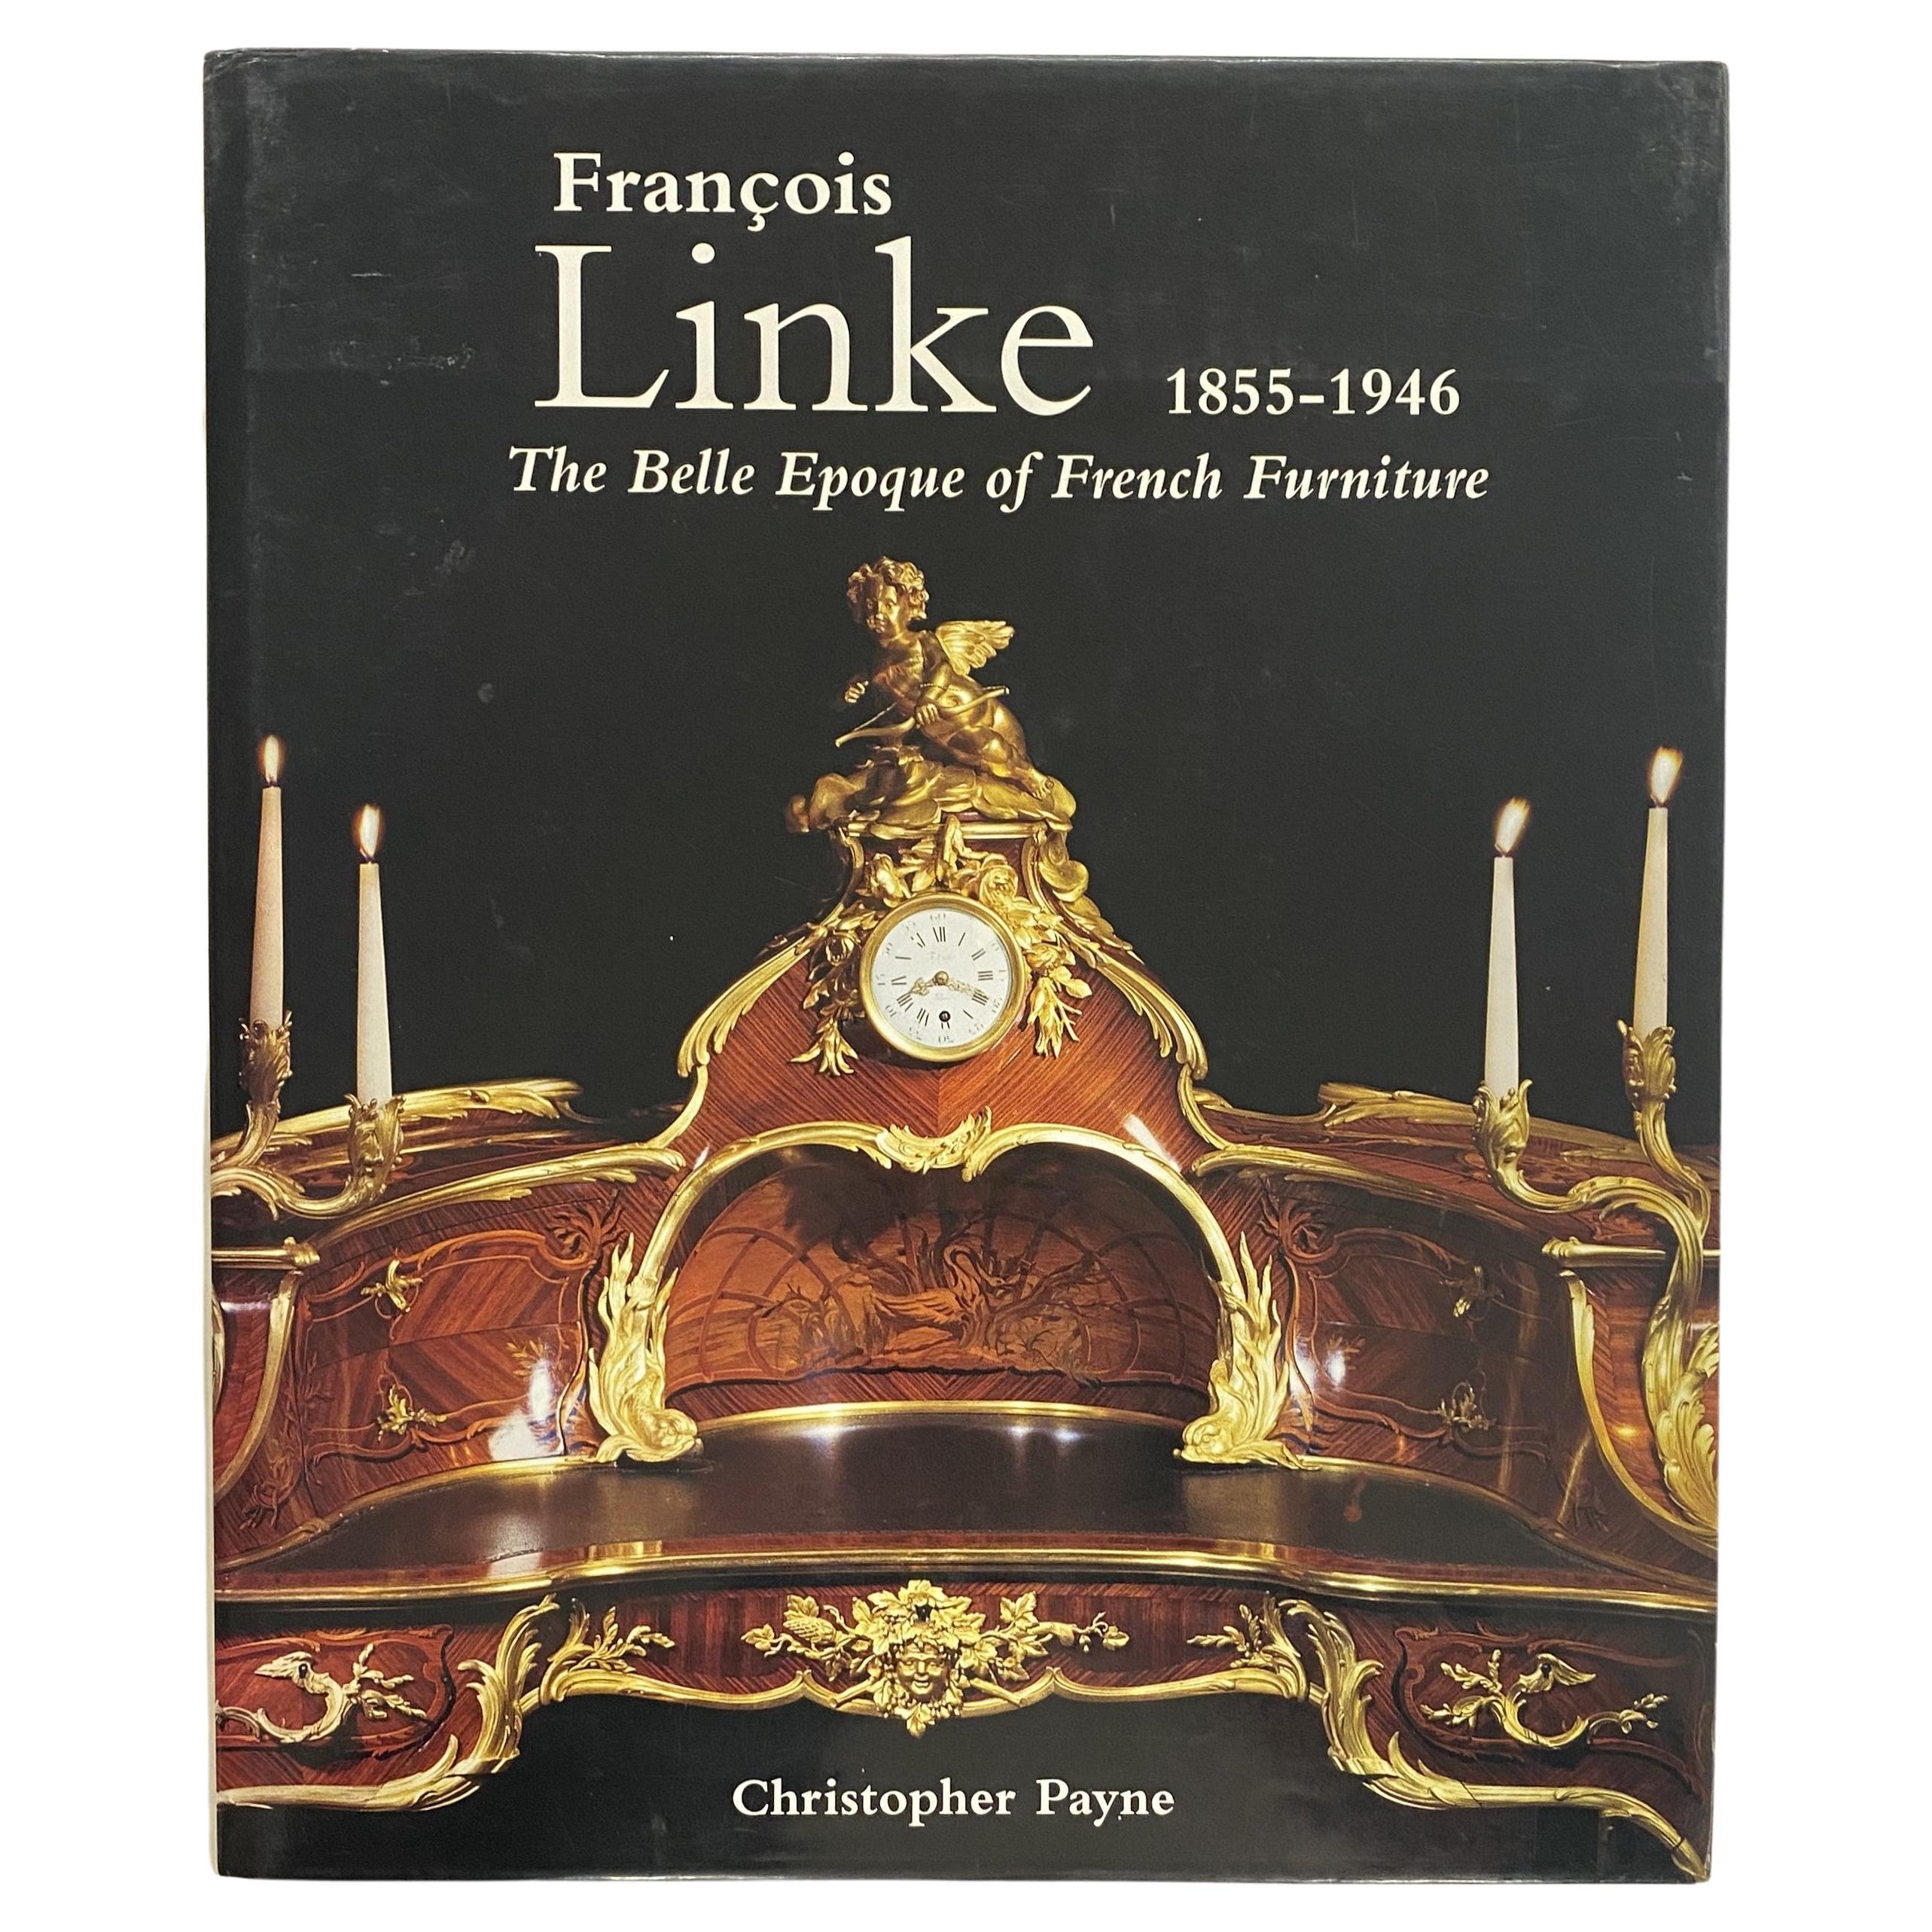 Francois Linke 1855-1946, the Belle Epoque of French Furniture by C Payne (Book) For Sale